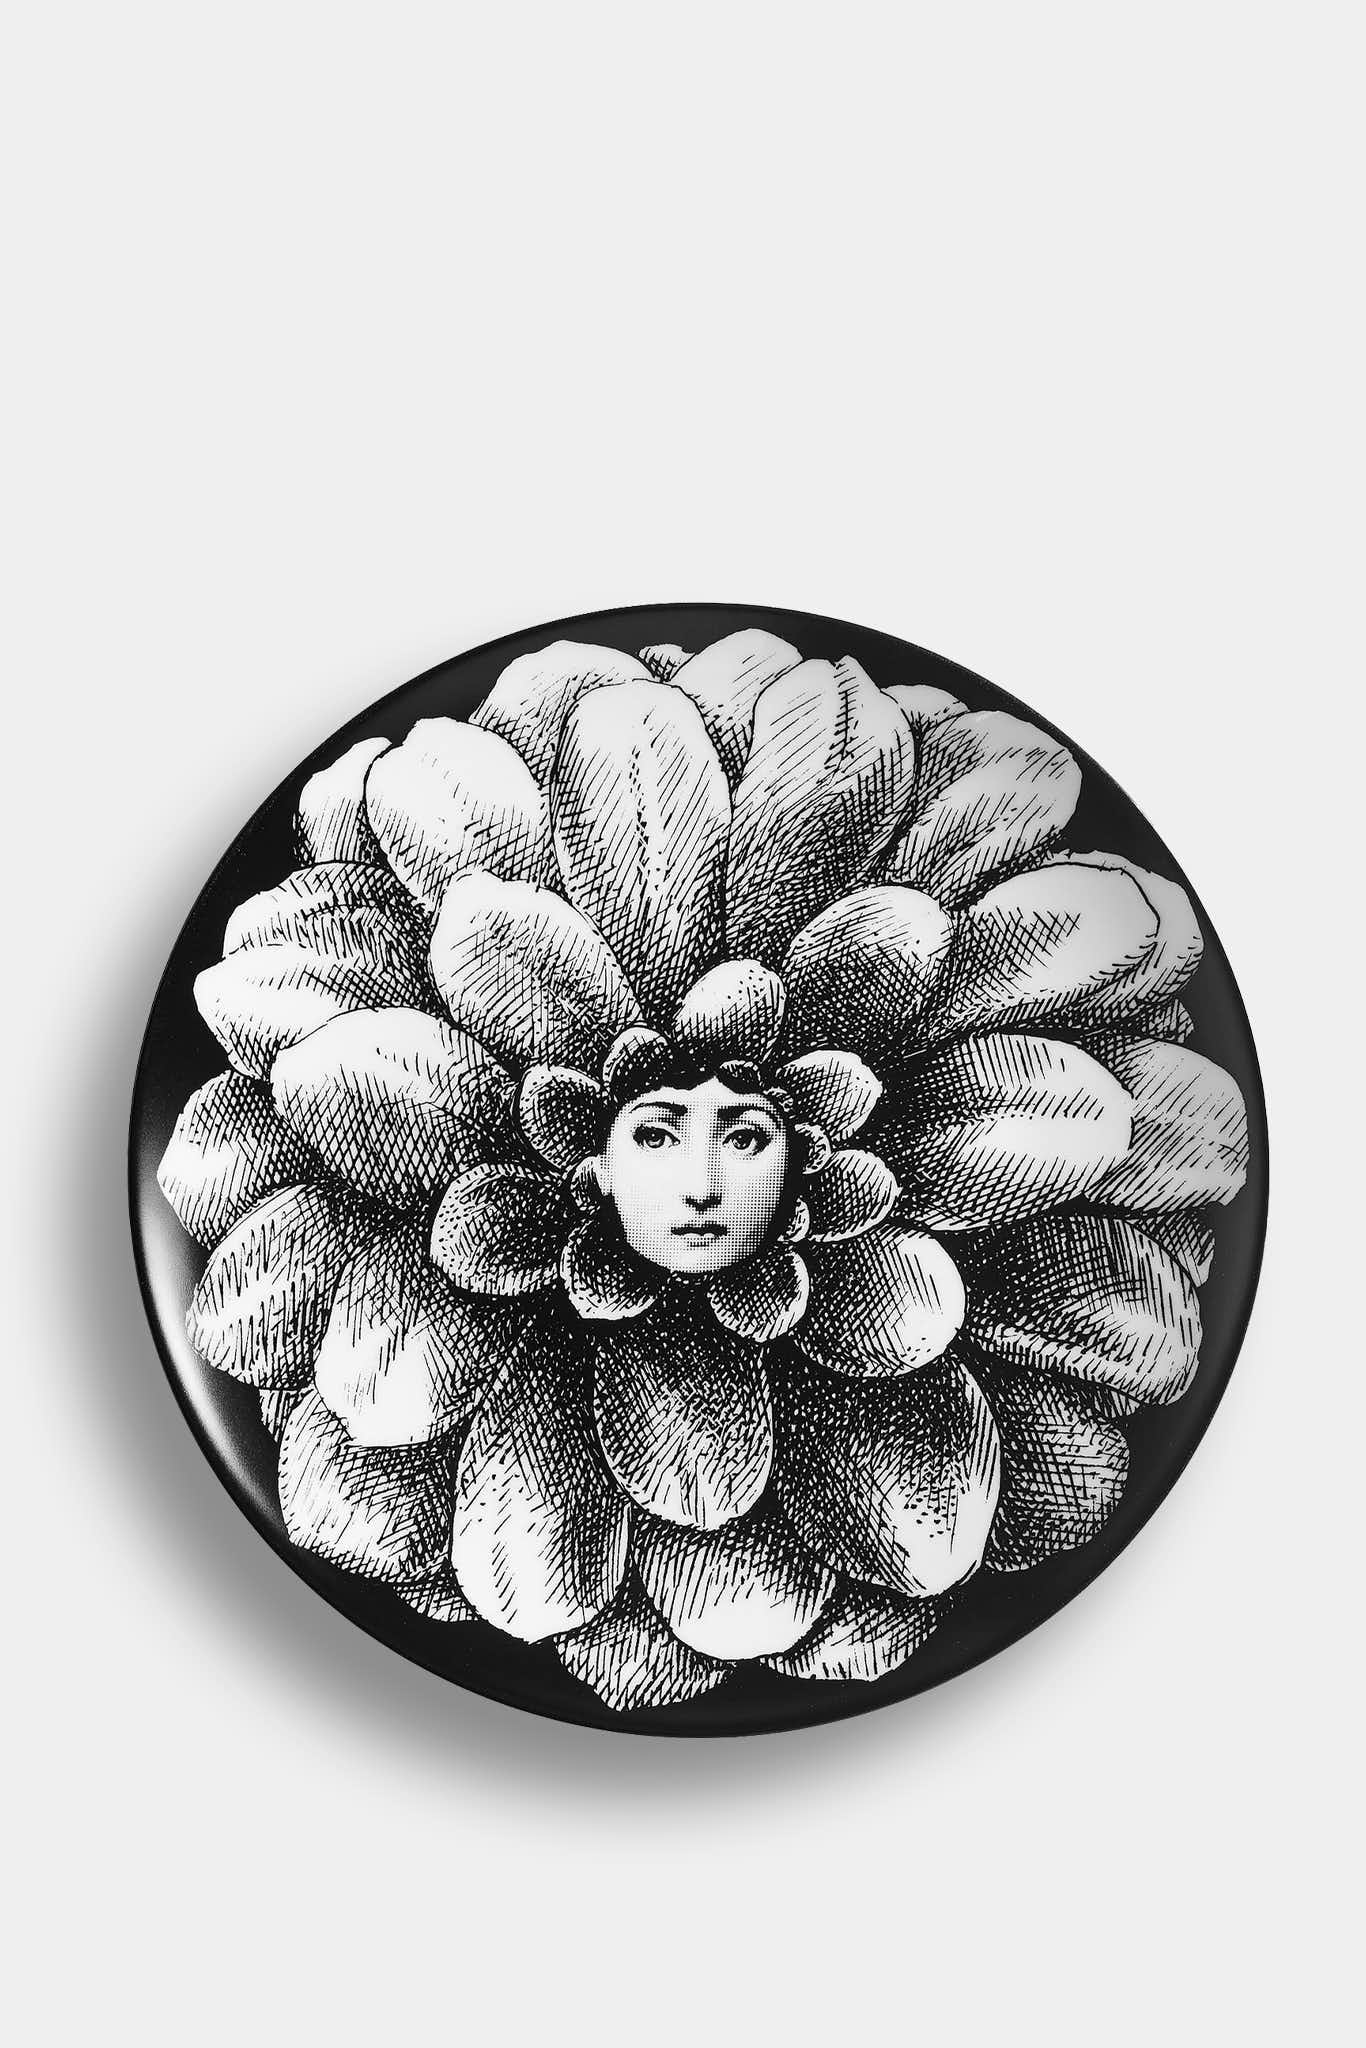 Fornasetti products for sale